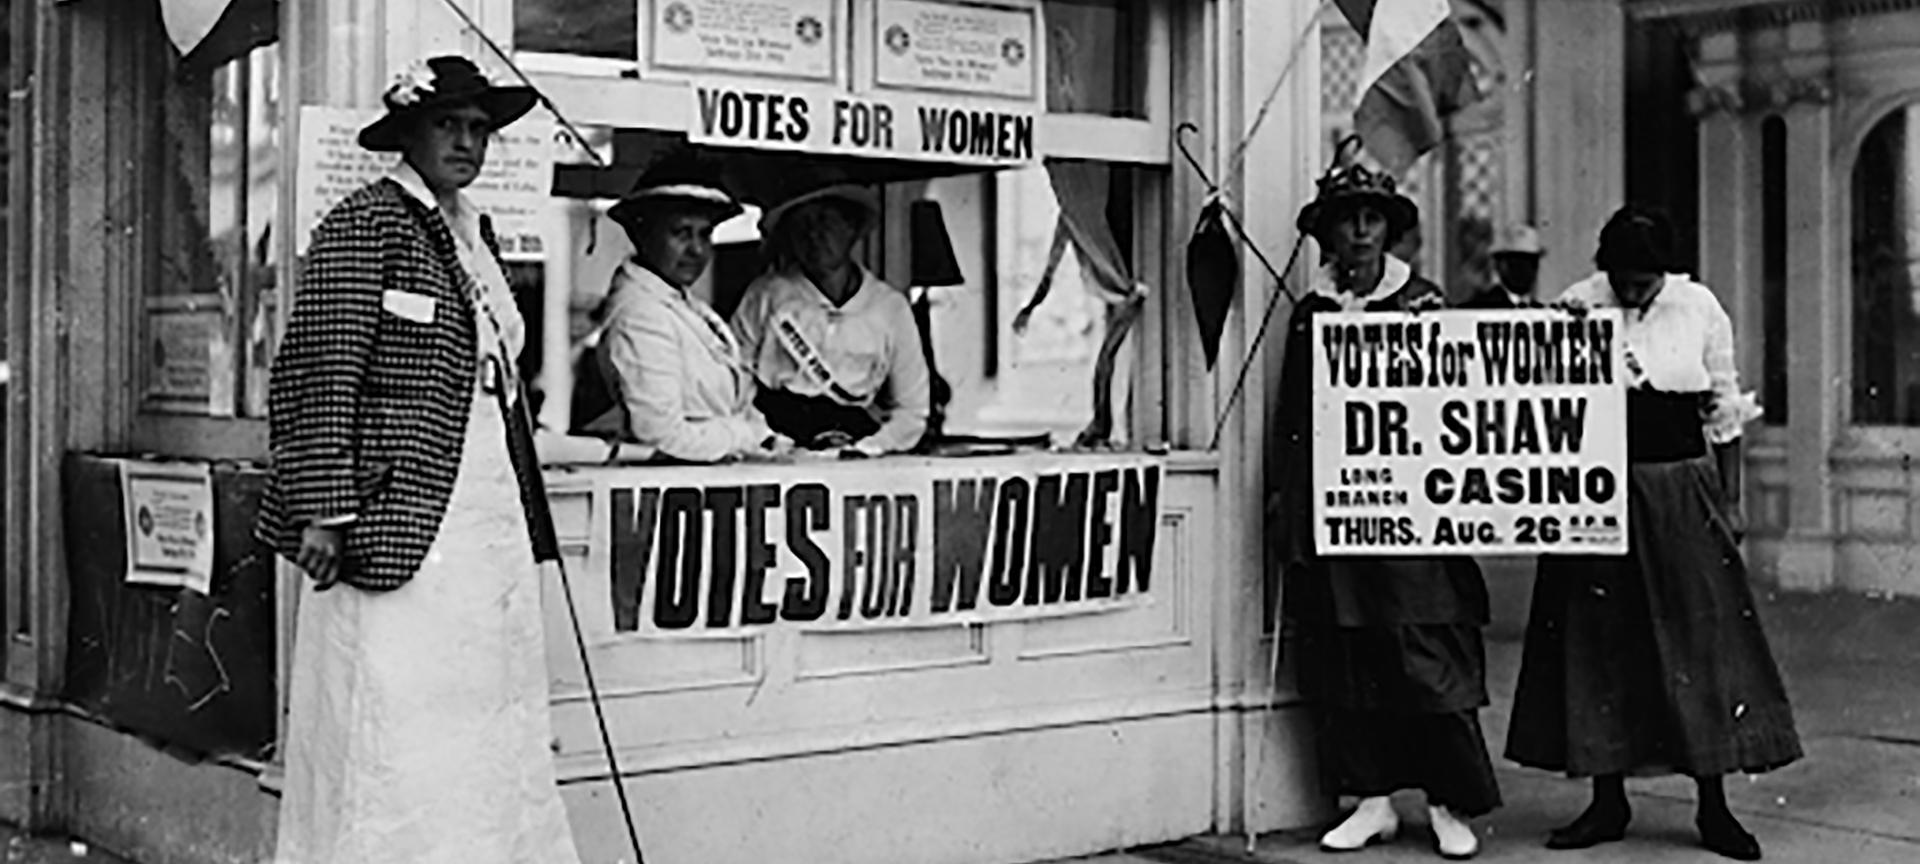 Image with Votes for Women signs.